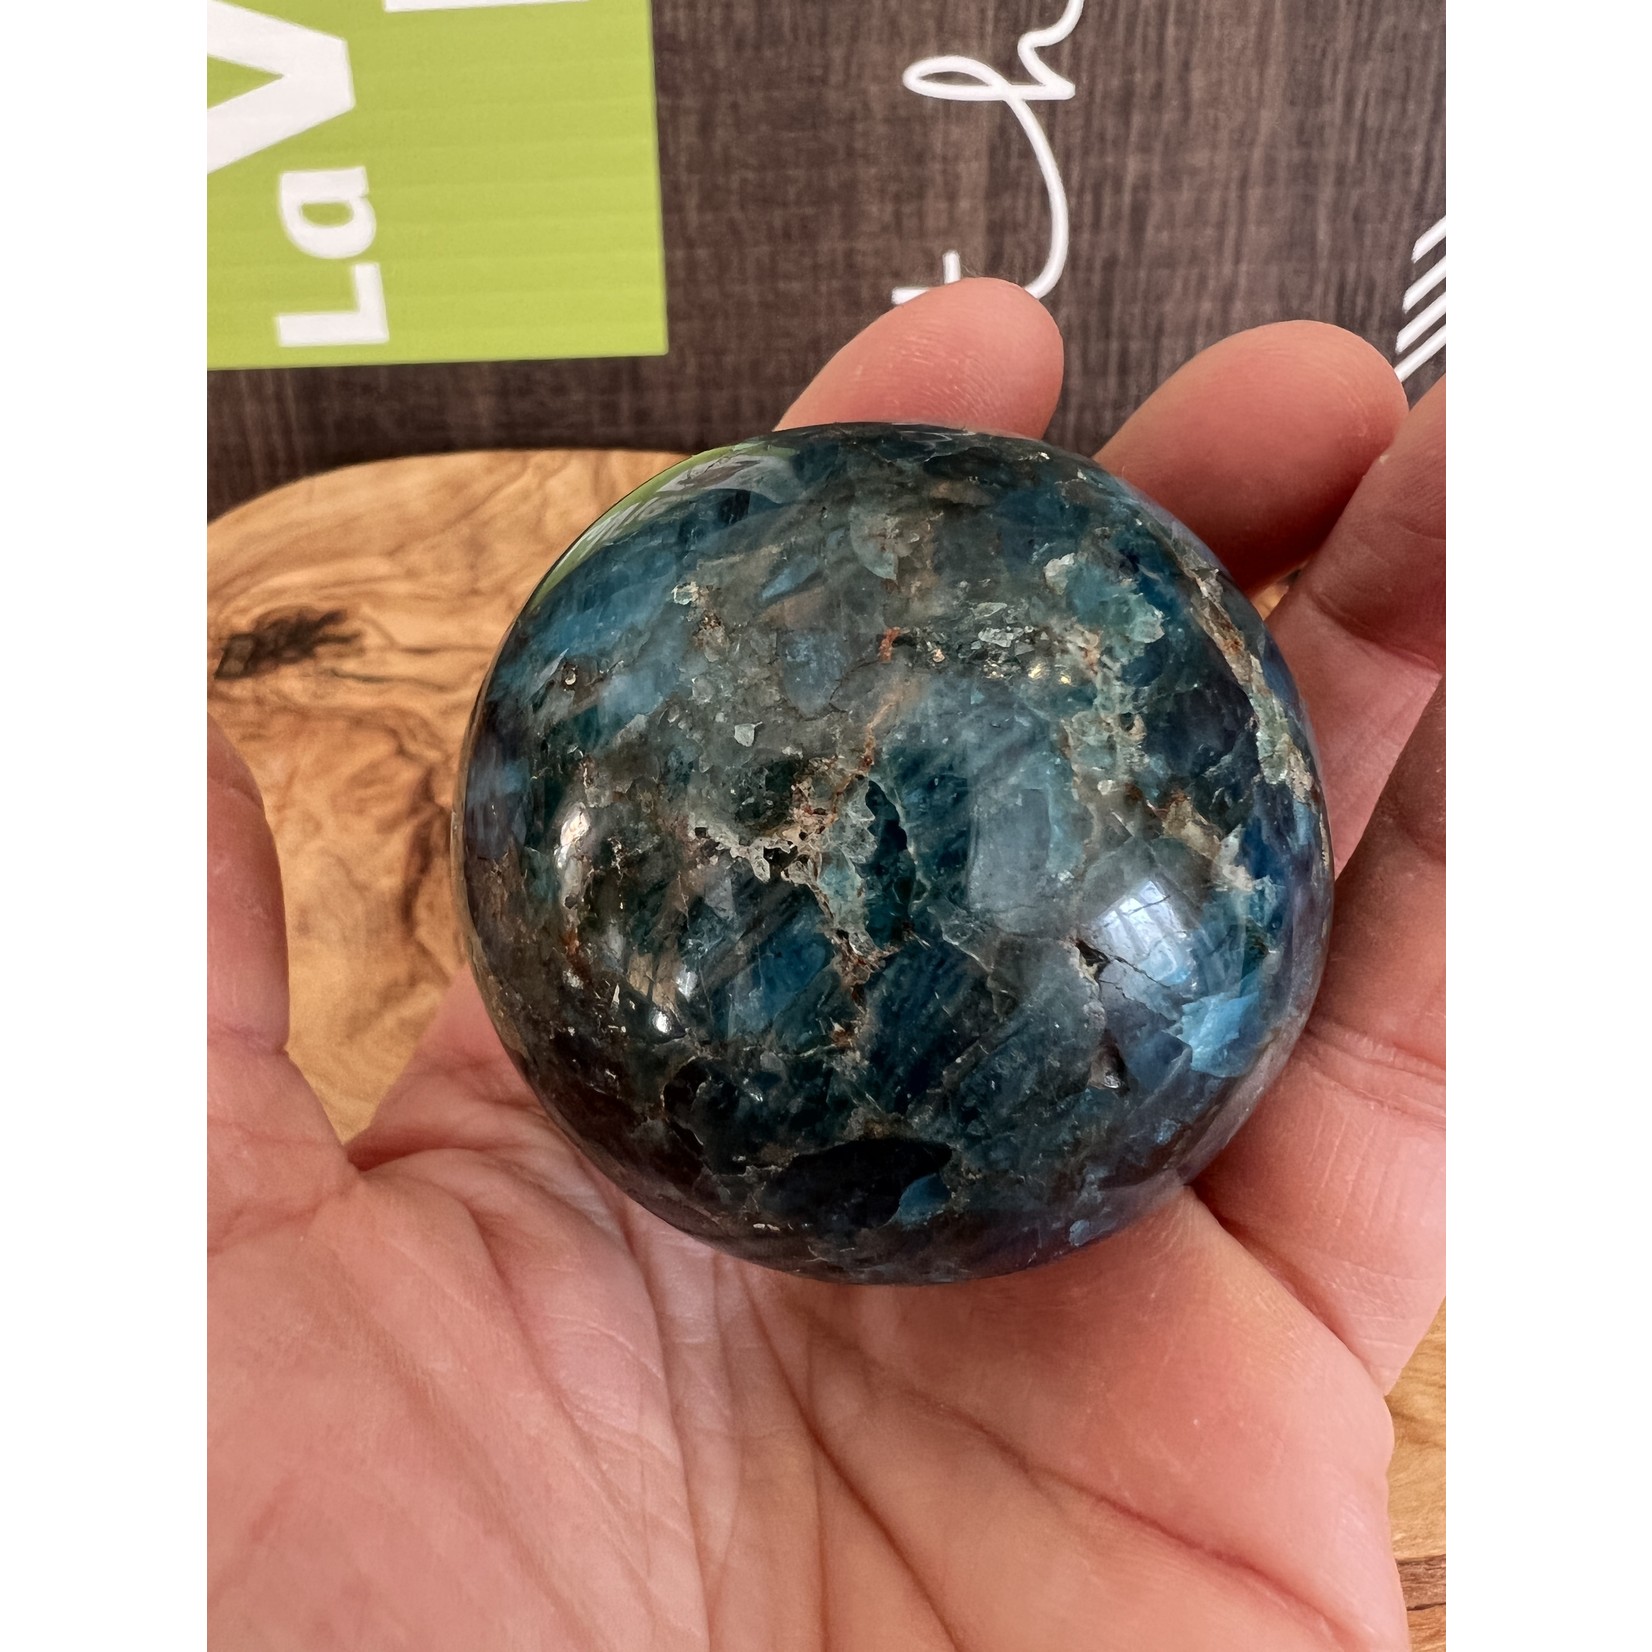 stunning apatite sphere, used to facilitate communication and self-expression